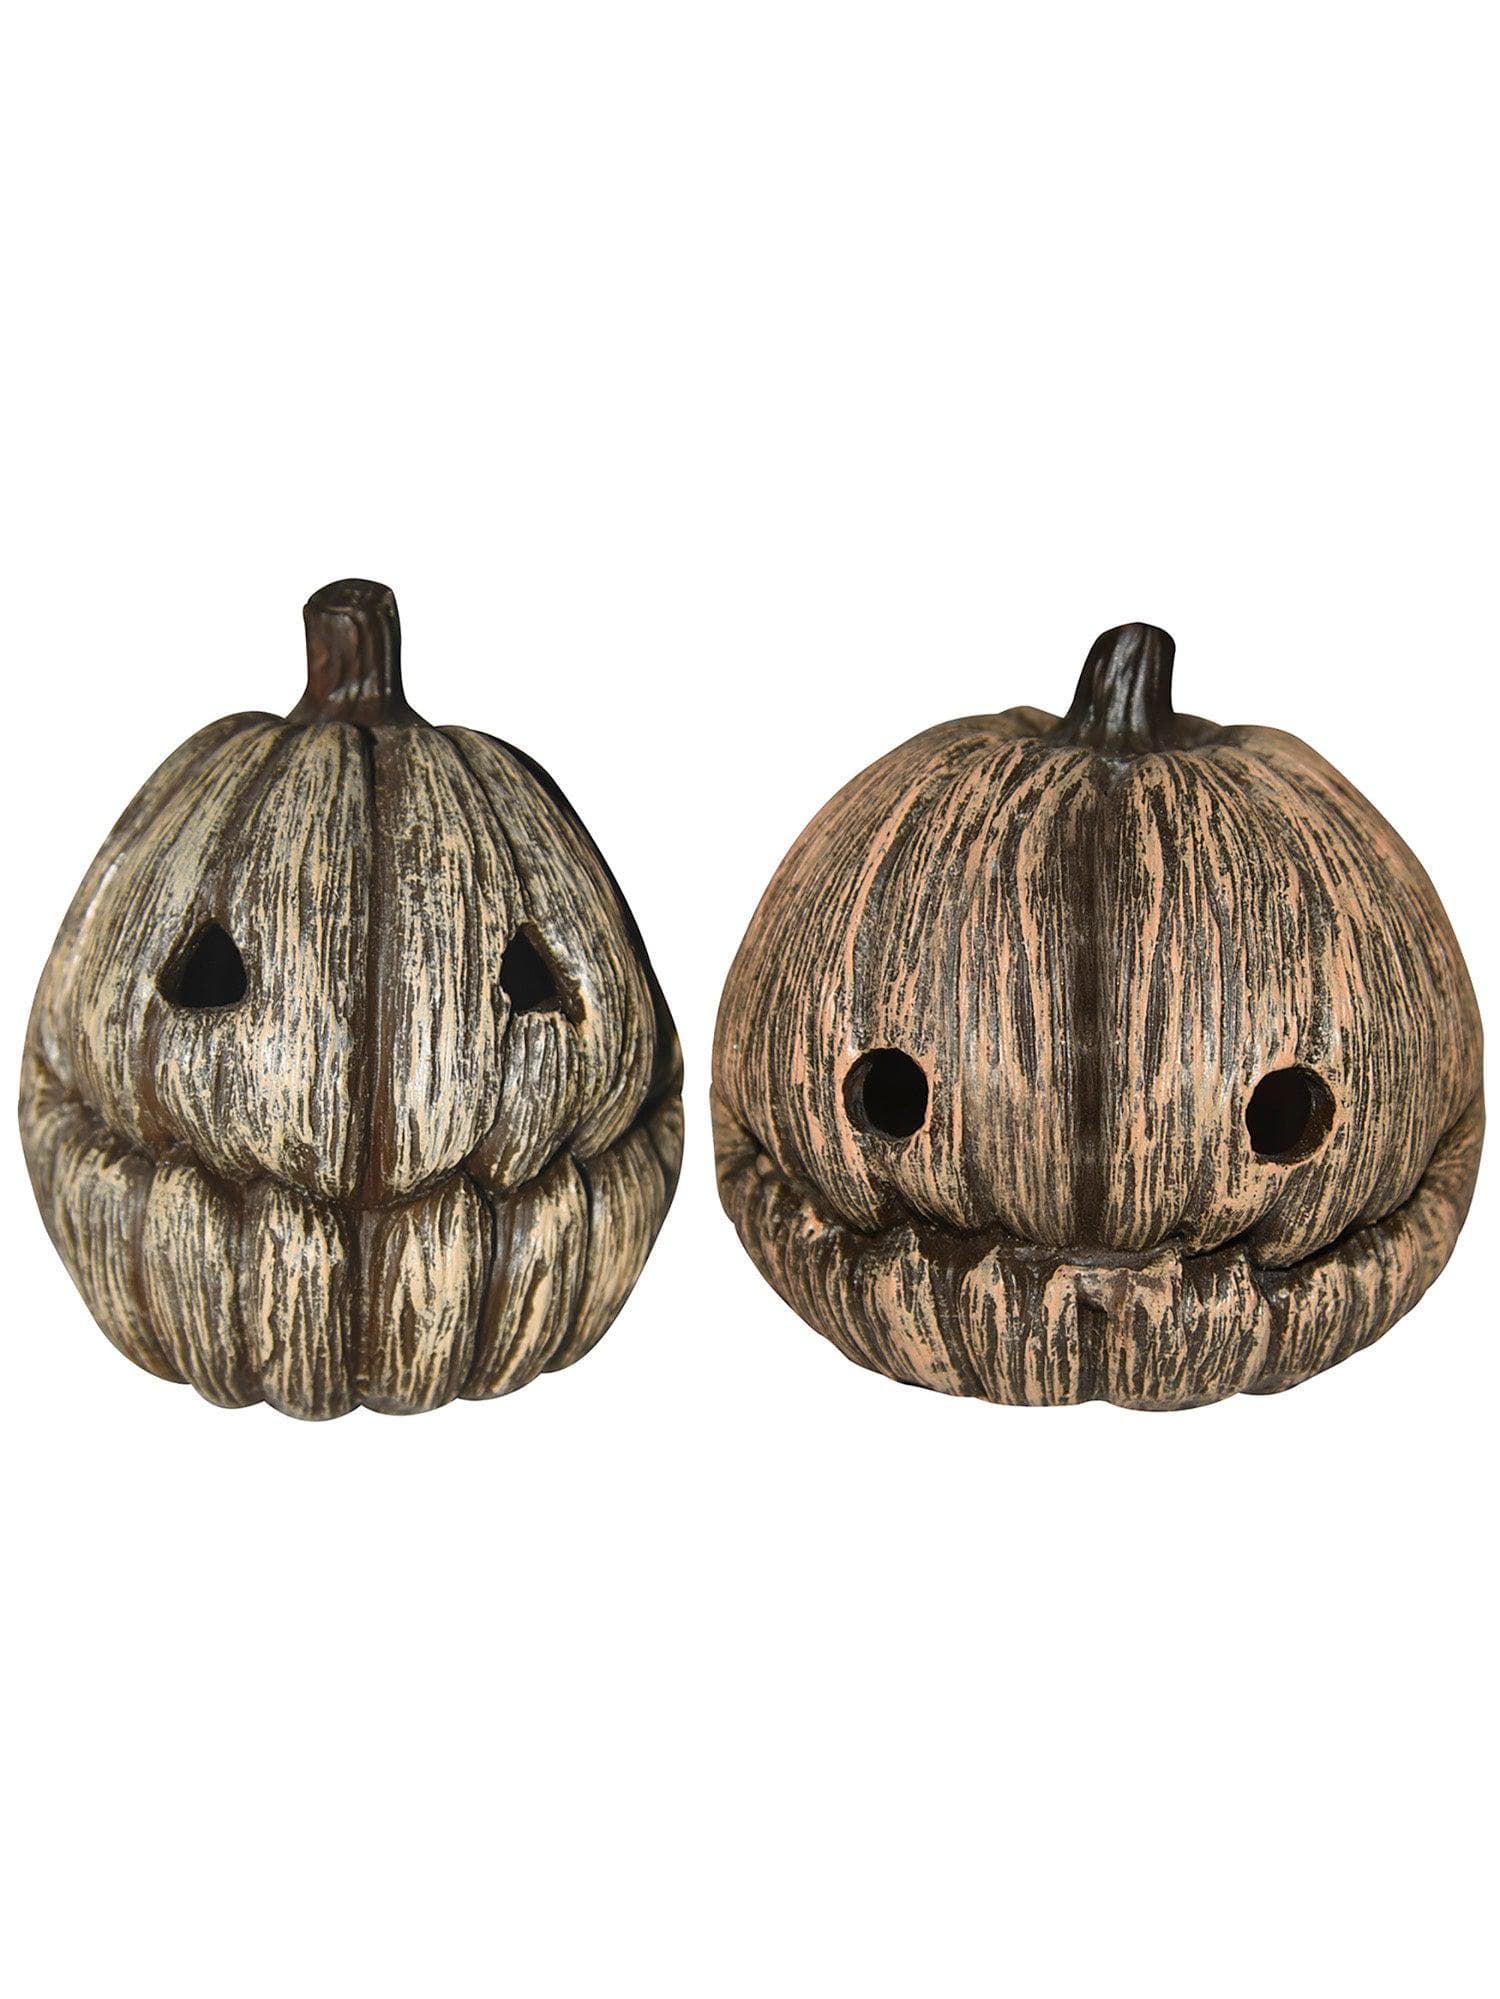 4 Inch Resin Aged Jack-O-Lantern Props (6 Count) - costumes.com